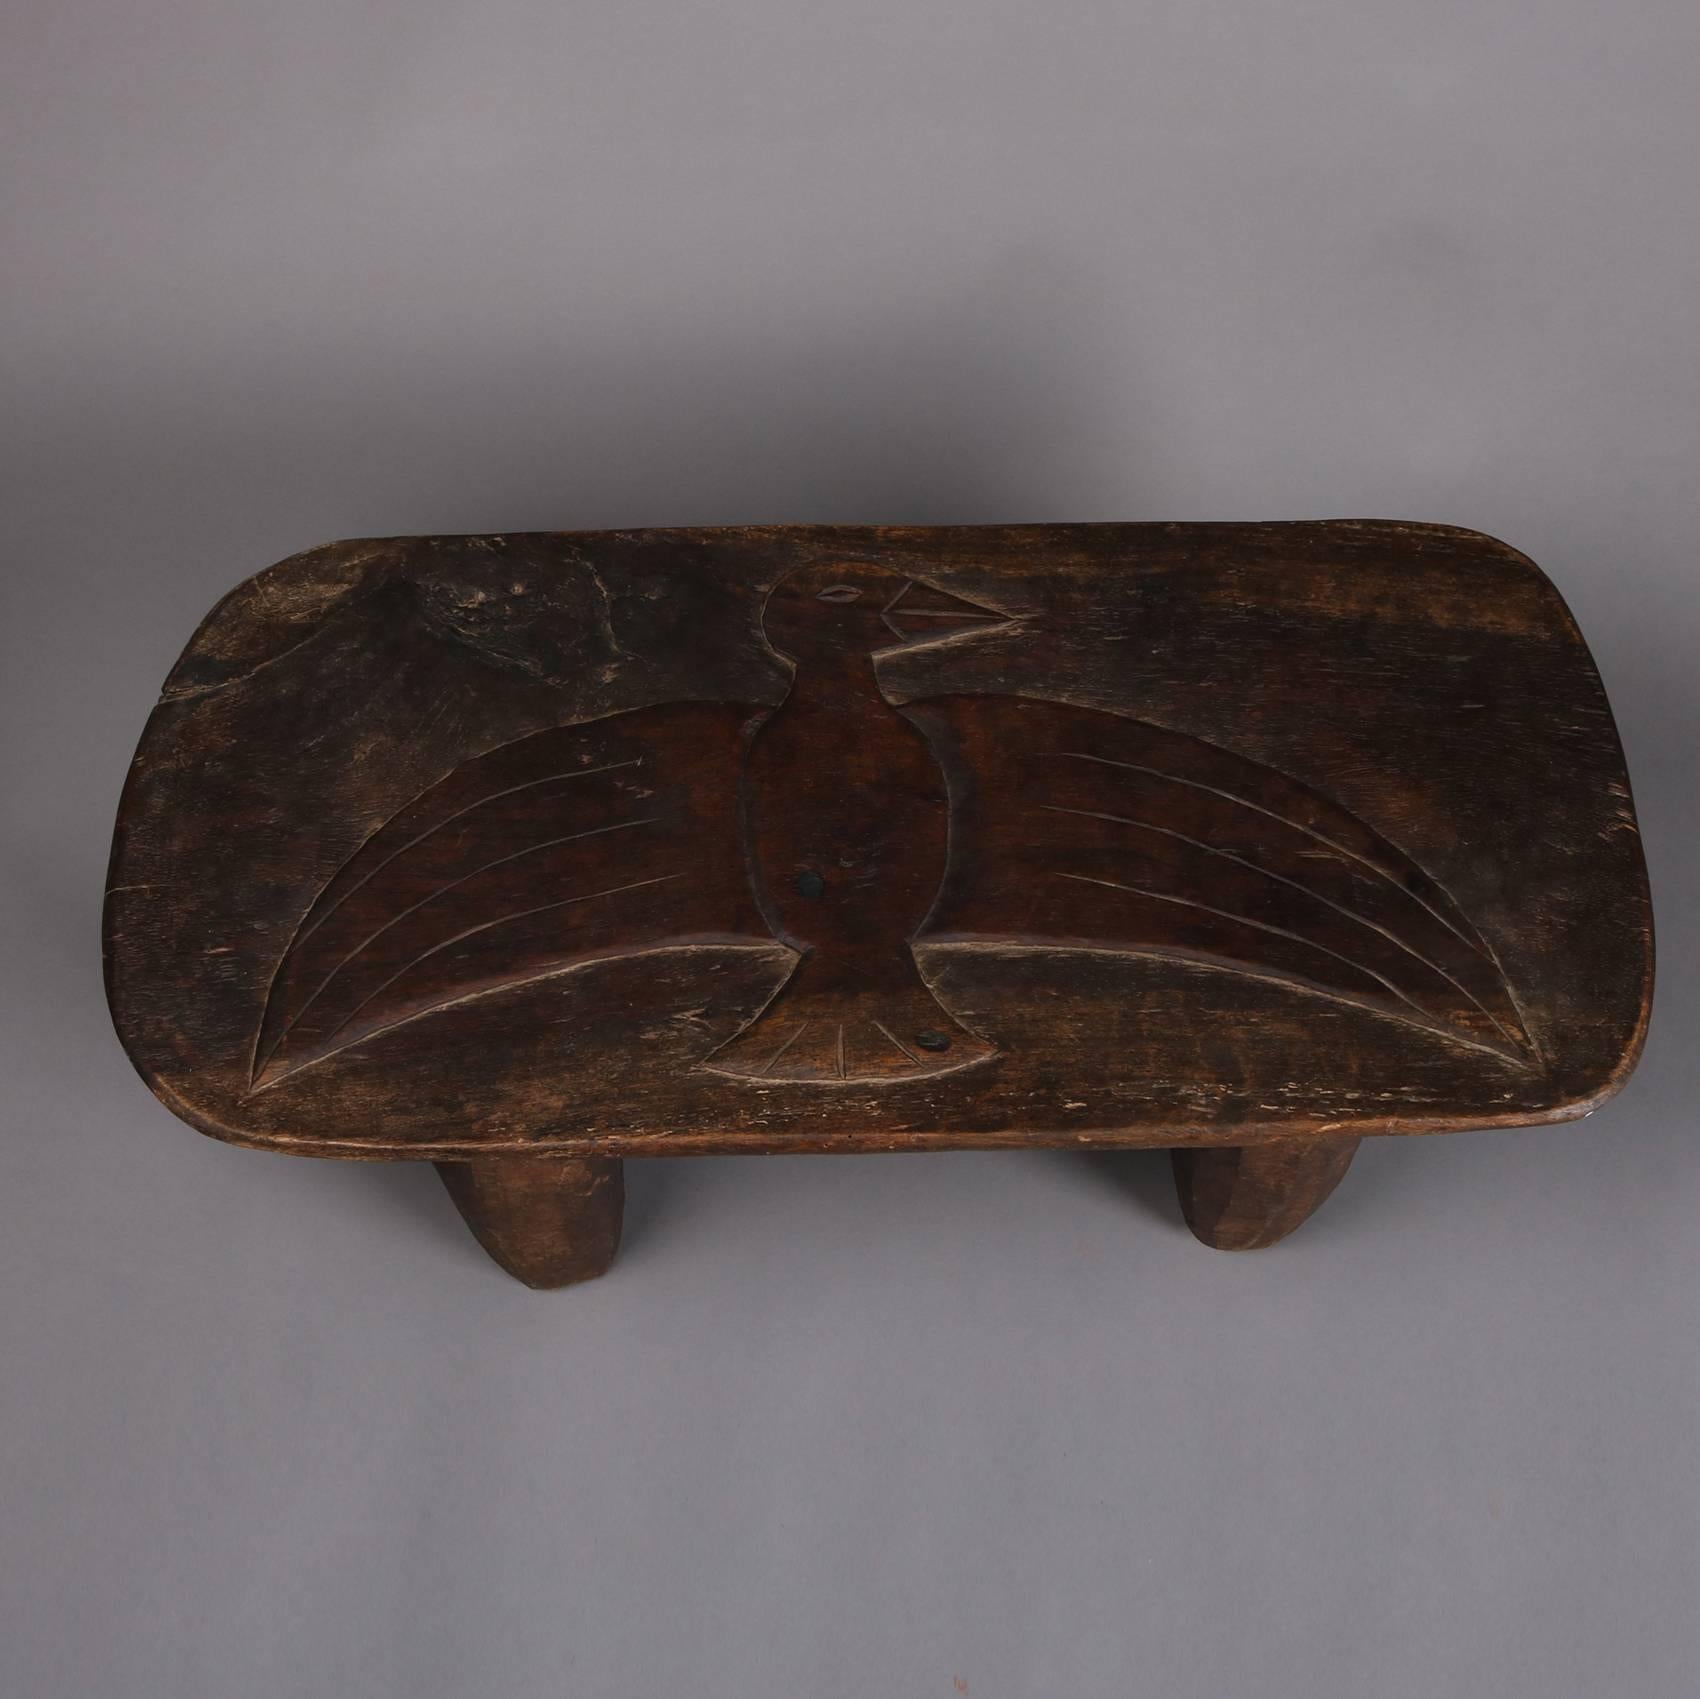 North American Folk Art Oaxacan Hand-Carved Primitive Low Bench with Eagle, 19th Century